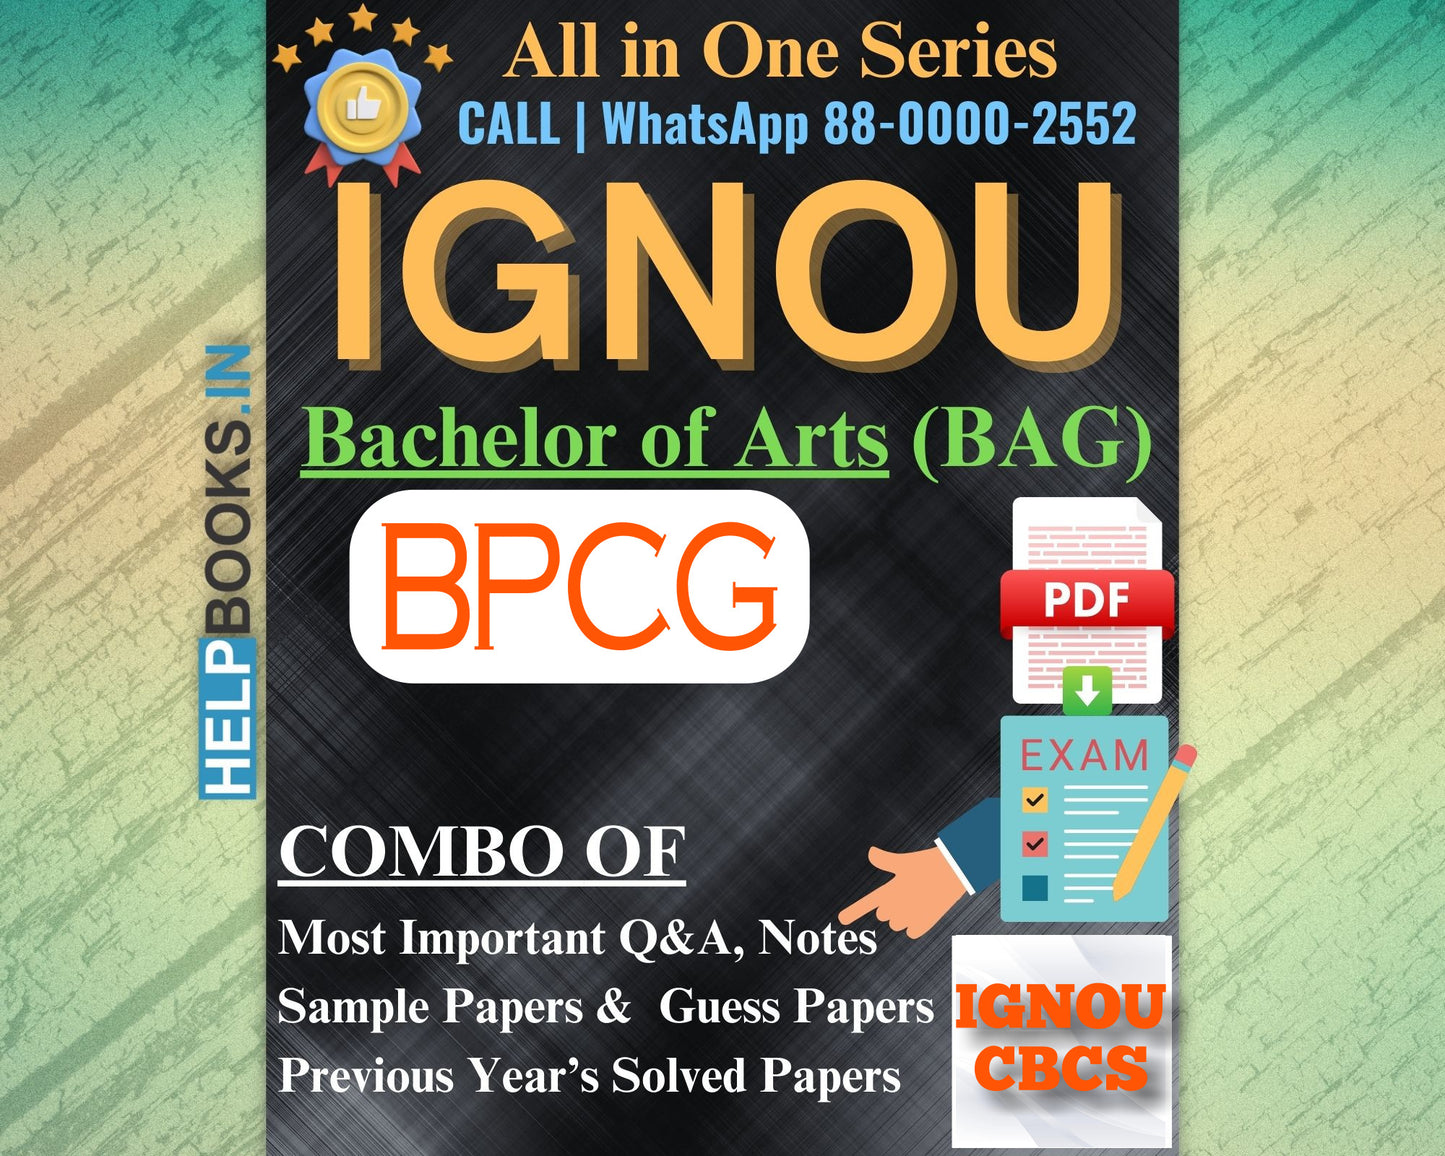 IGNOU BAG Online Study Package: Bachelor of Arts (BA) - Previous Years Solved Papers, Q&A, Exam Notes, Sample Papers, Guess Papers-BPCG171, BPCG172, BPCG173, BPCG174, BPCG175, BPCG176